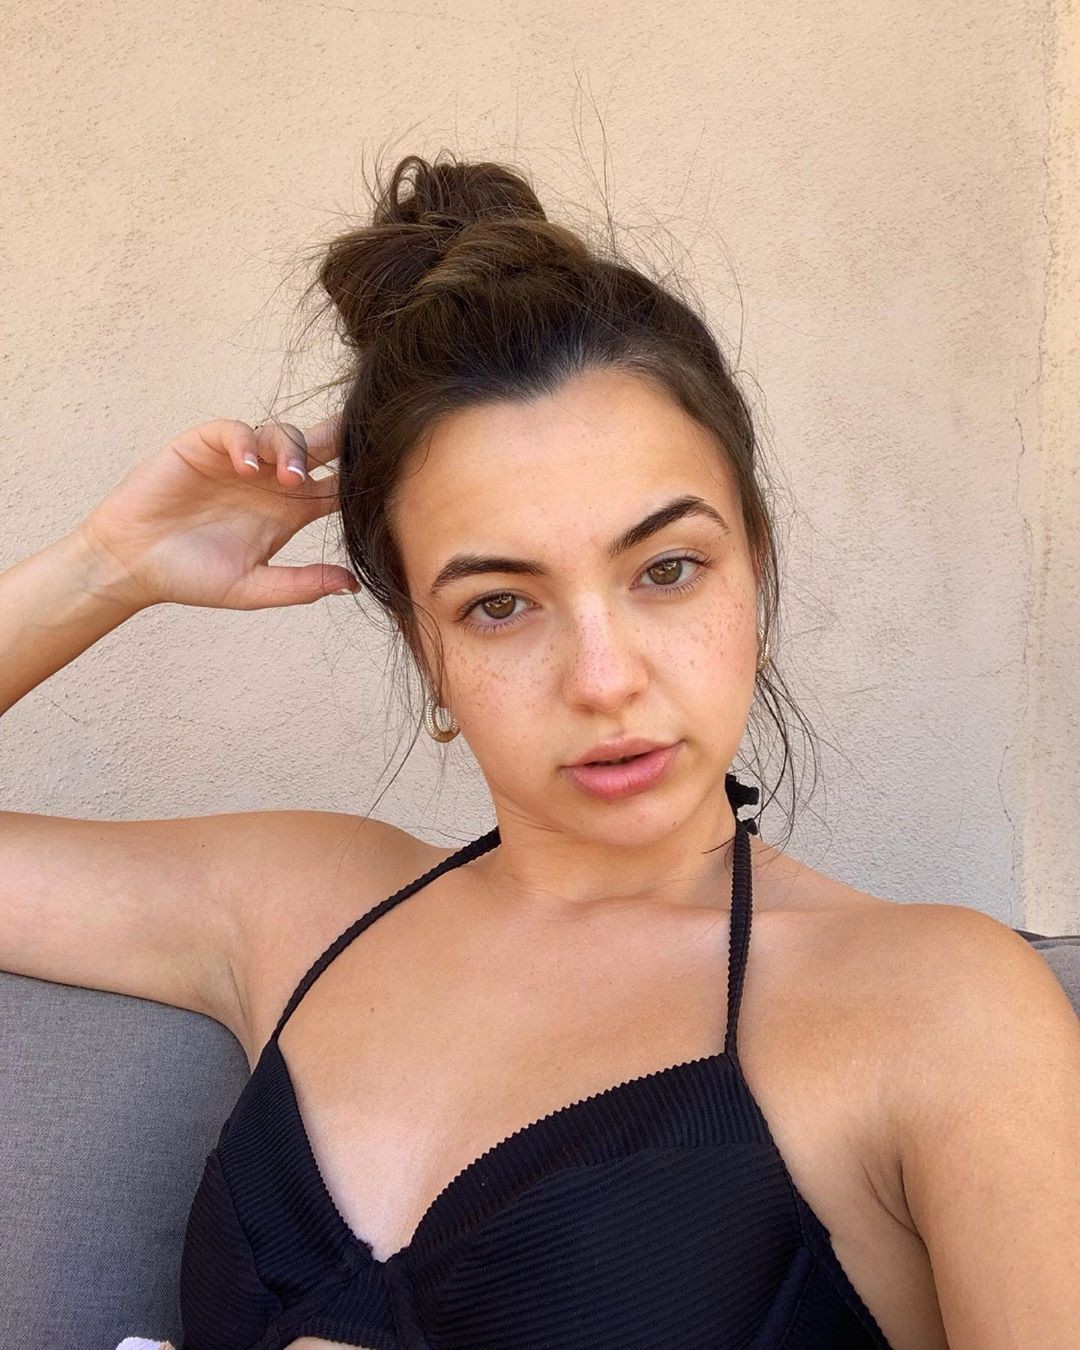 Vanessa Merrell Face Makeup Ideas, Natural Lips, Hairstyle For Women: Hairstyle Ideas,  Cute Girls Instagram,  Cute Instagram Girls,  TikTok Star Vanessa Merrell,  Selfie Poses For Girls  